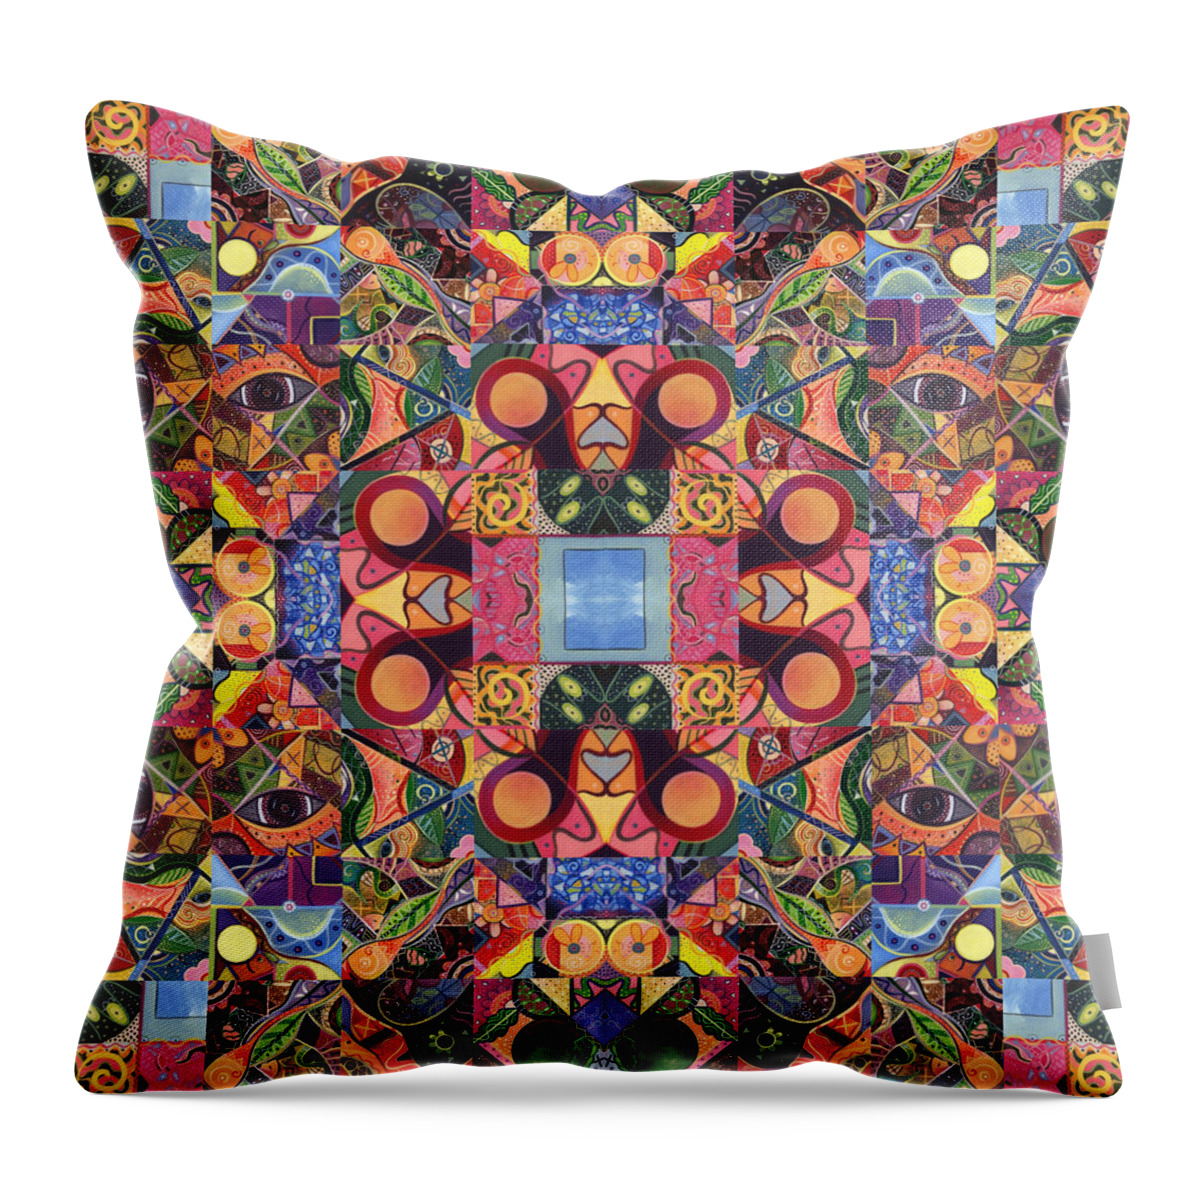 Abstract Throw Pillow featuring the digital art The Joy of Design Mandala Series Puzzle 2 Arrangement 5 by Helena Tiainen